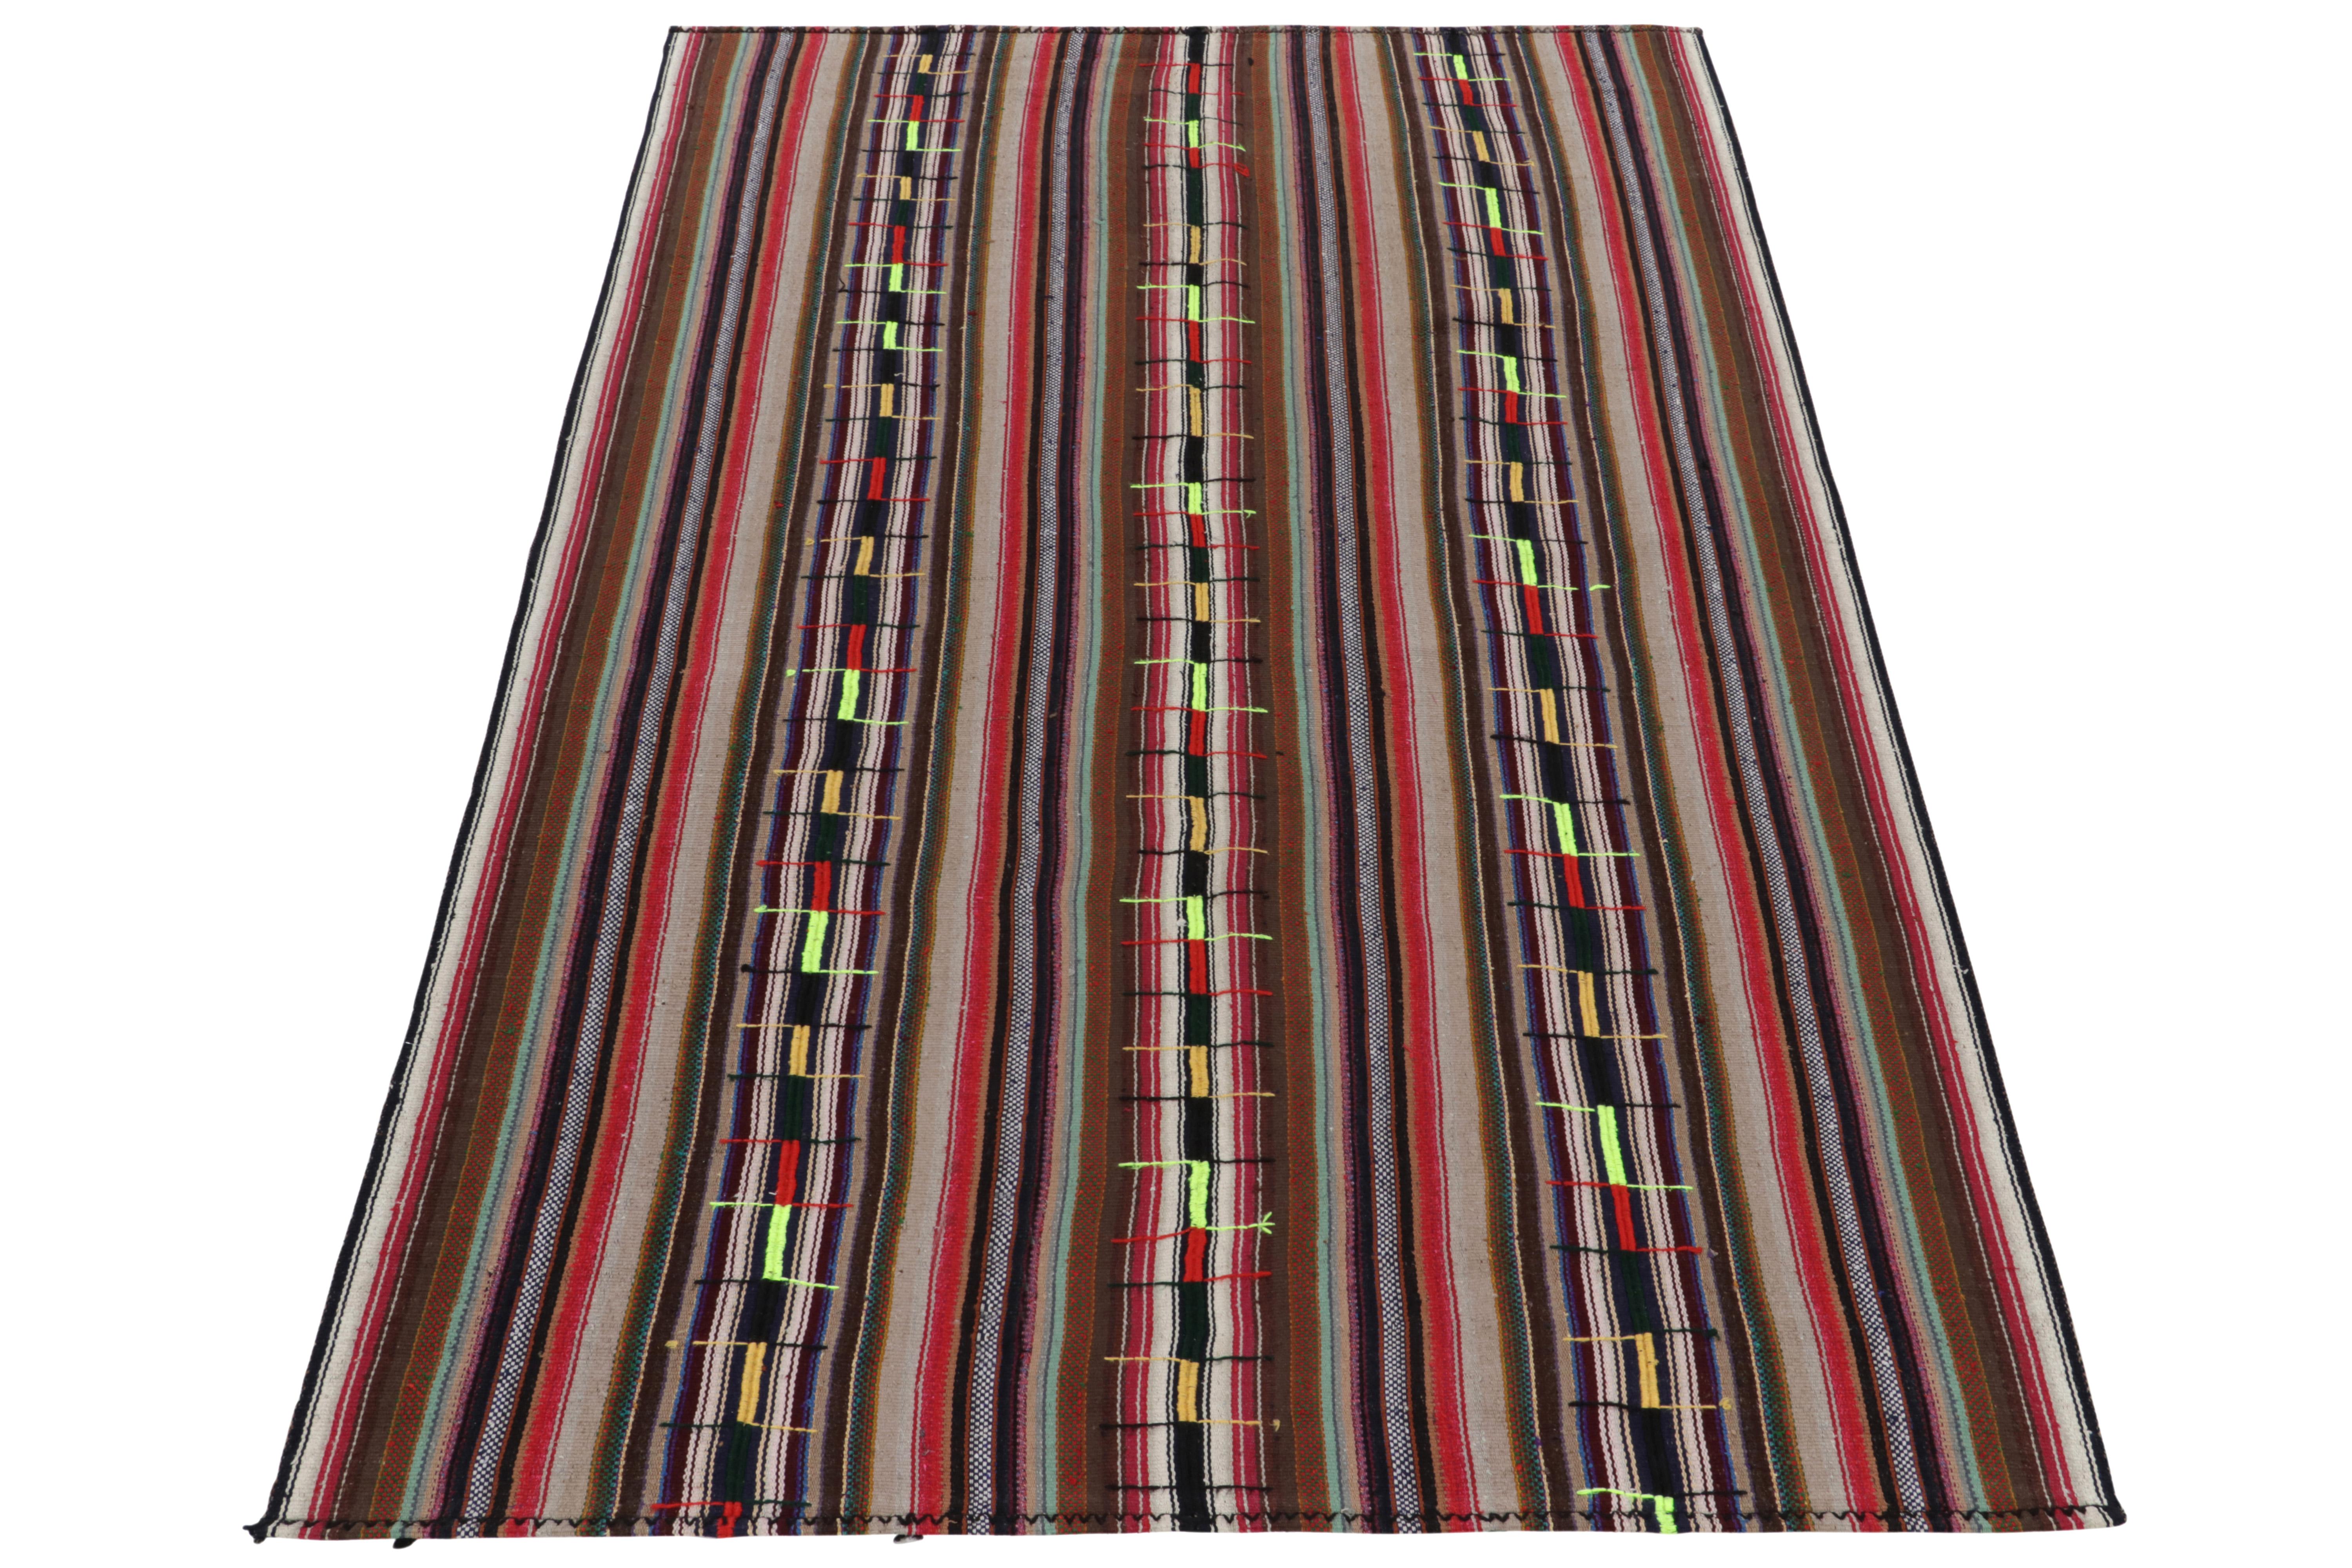 Originating from Turkey circa 1950-1960, a rare type of chaput kilim rug style now entering our Antique & Vintage selections. Characterized by fine detailing with the colors within the polychromatic stripes, the light & refreshing piece welcomes a